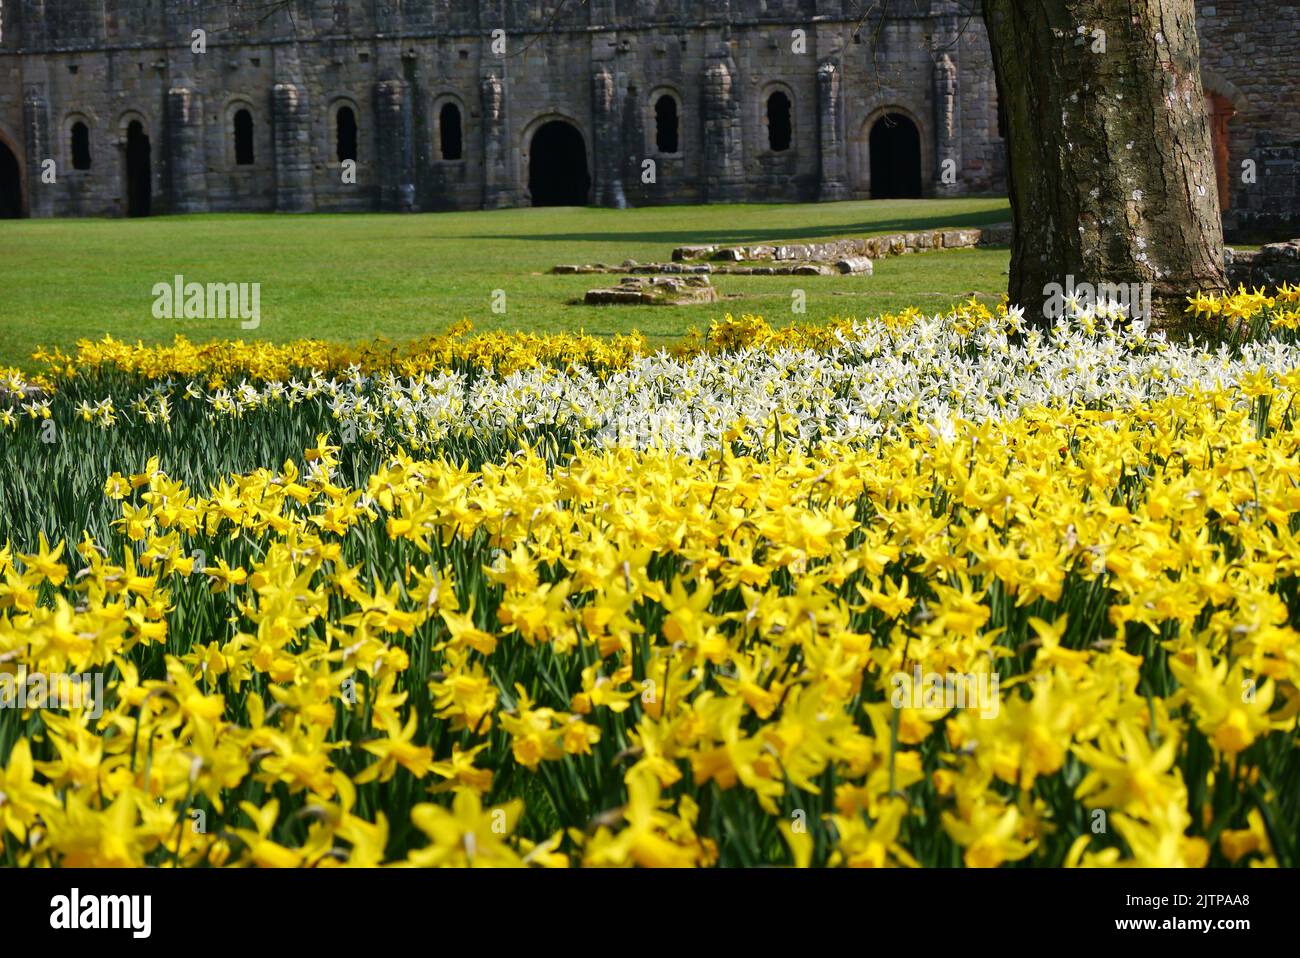 Yellow Springtime Daffodils by the Ruins of Fountains Abbey Cistercian Monastery, North Yorkshire, England, UK. Stock Photo